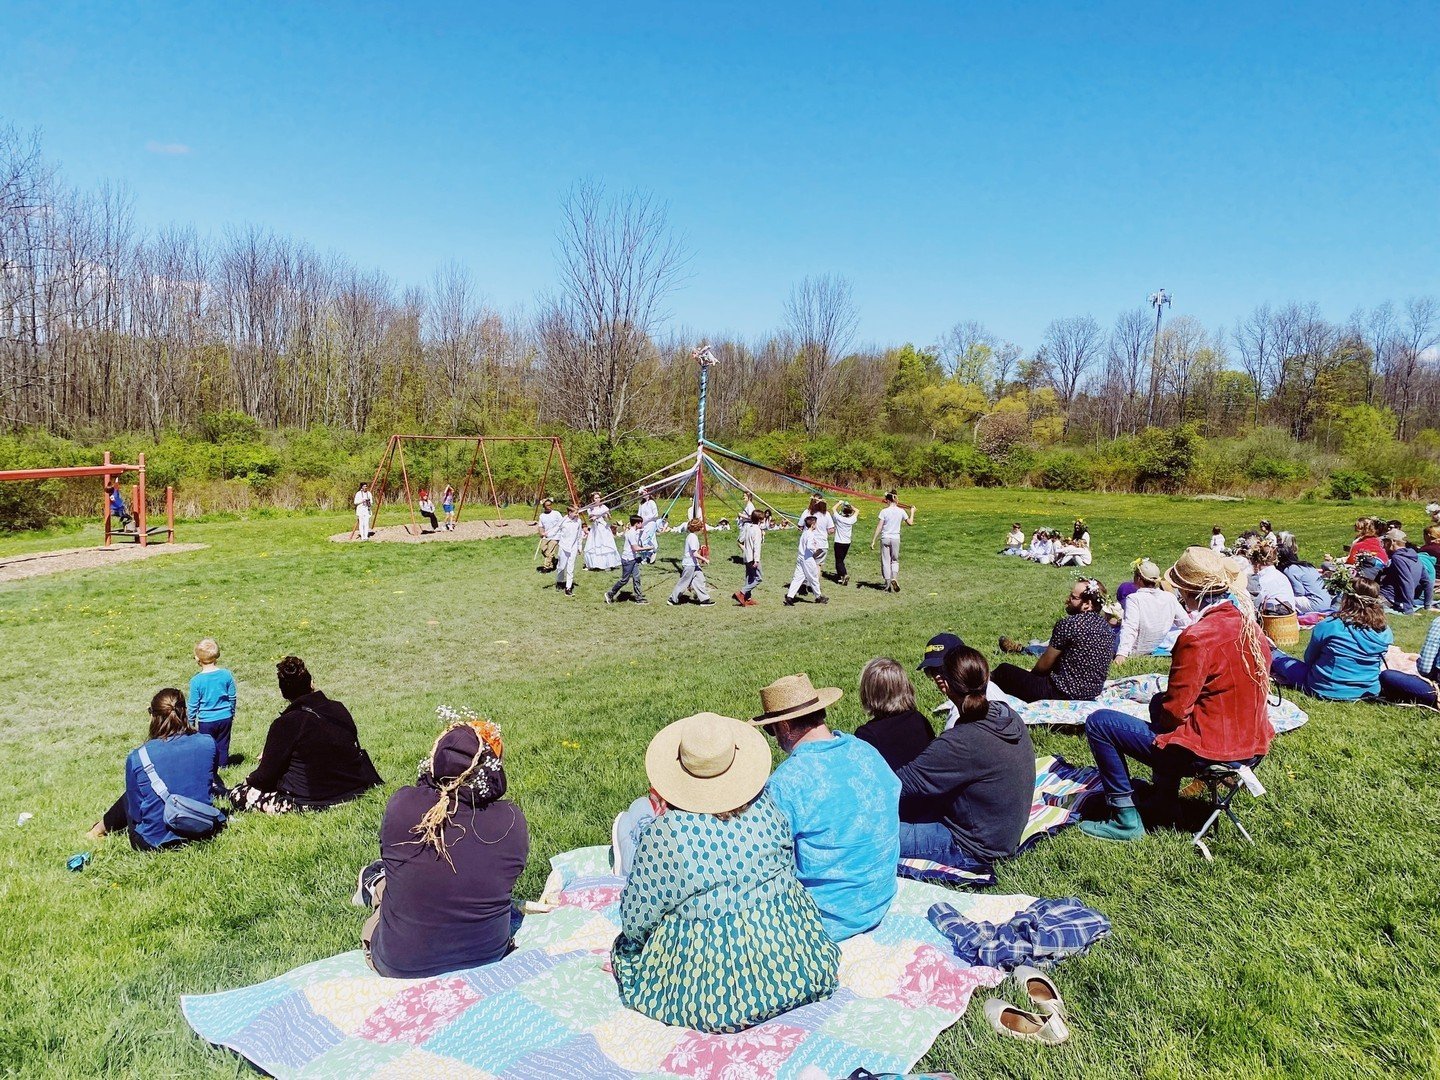 See you tomorrow at MayFaire!⁠
⁠
10am-2pm Saturday, May 4th⁠
Ithaca Waldorf School⁠
20 Nelson Road, Ithaca, NY⁠
free admission; free and low-cost crafts for kids⁠
puppet show, live music, maypole dances, craft vendors⁠
⁠
#mayfaire #springfestival #ma